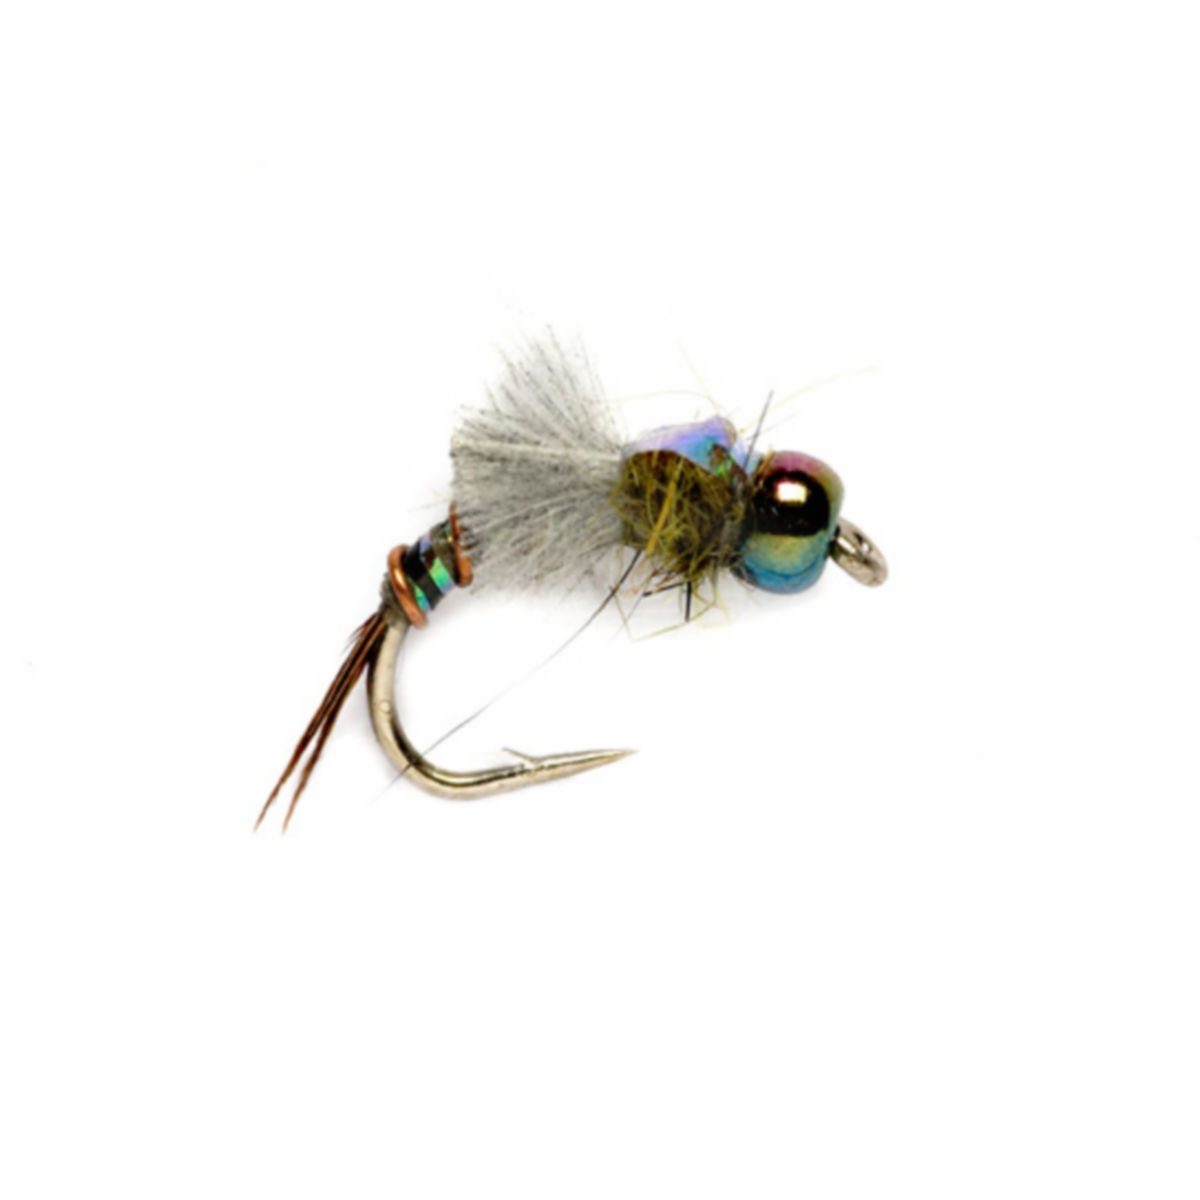 Hickey’s Glass Bead Auto Emerger - image number 0